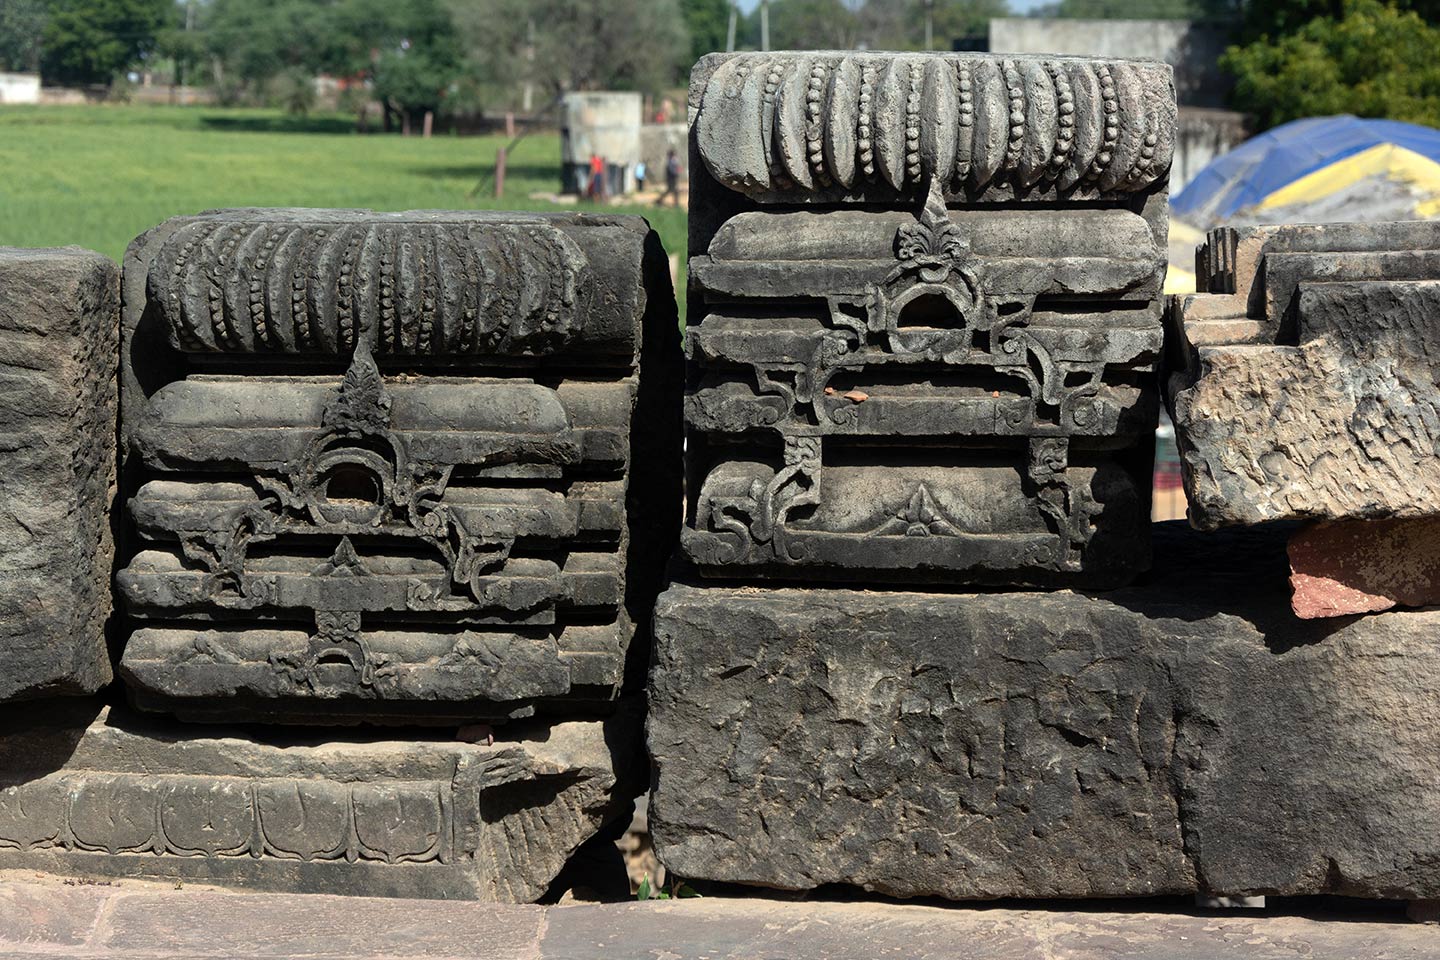 Most fragments assembled here were once part of the shikhara of the original temple, other subsidiary structures, and associated parts like the urushringa (subsidiary tower projecting from the sides of the main shikhara). The original shikhara did not survive and was replaced by a circular dome during the restoration.